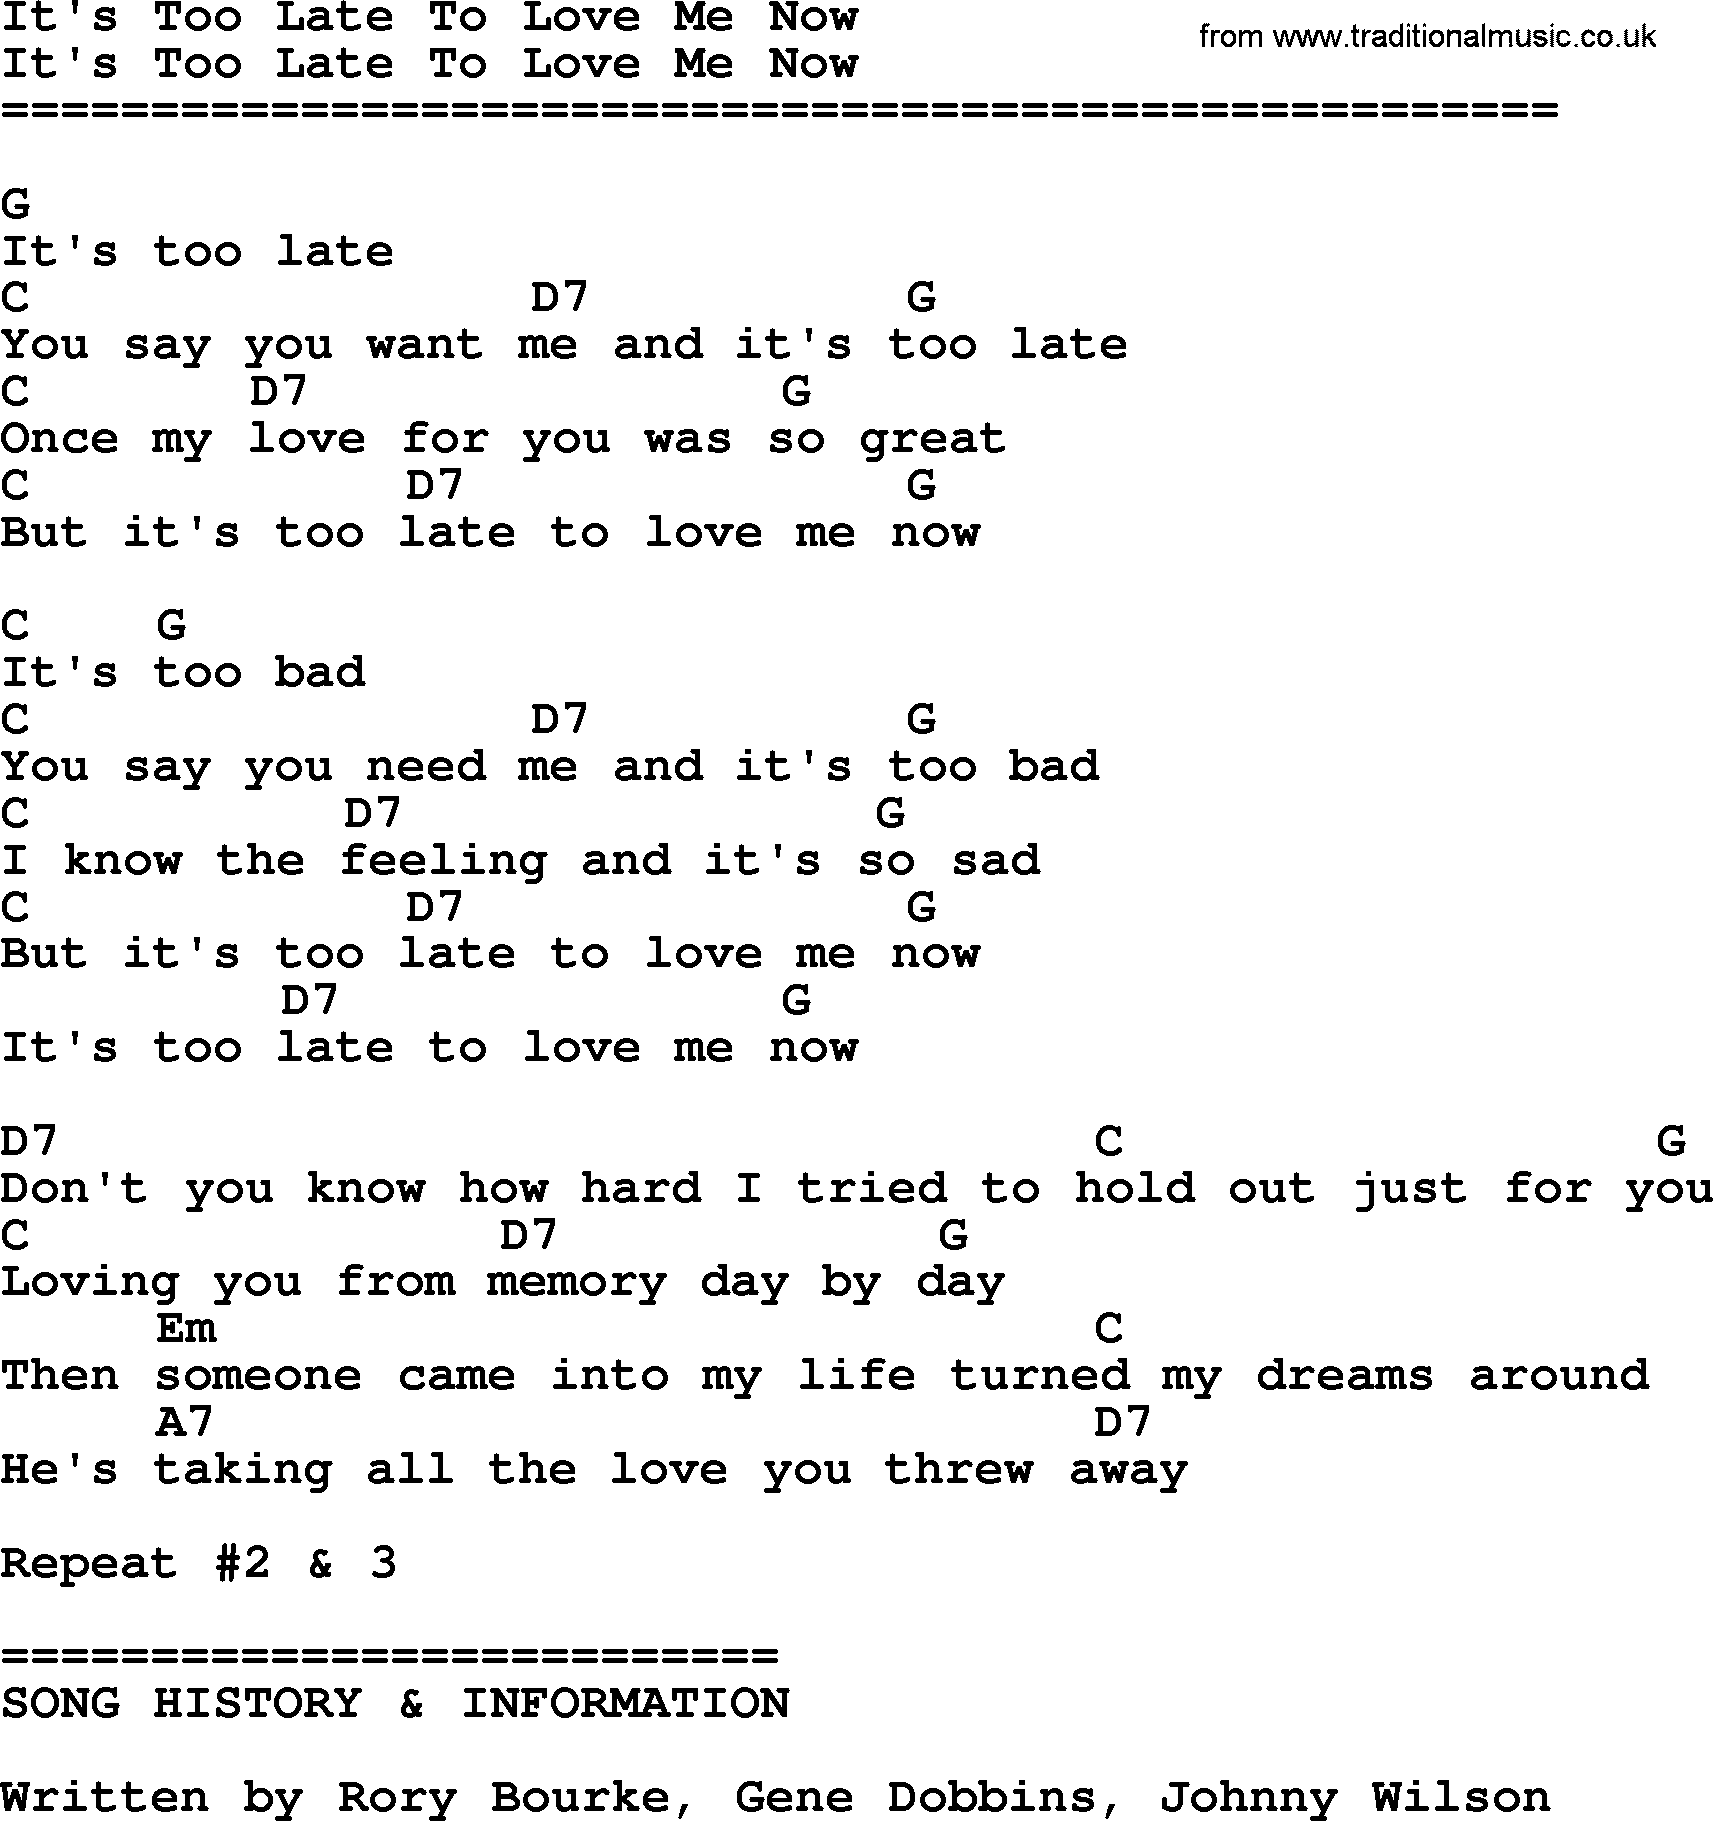 Bluegrass song: It's Too Late To Love Me Now, lyrics and chords